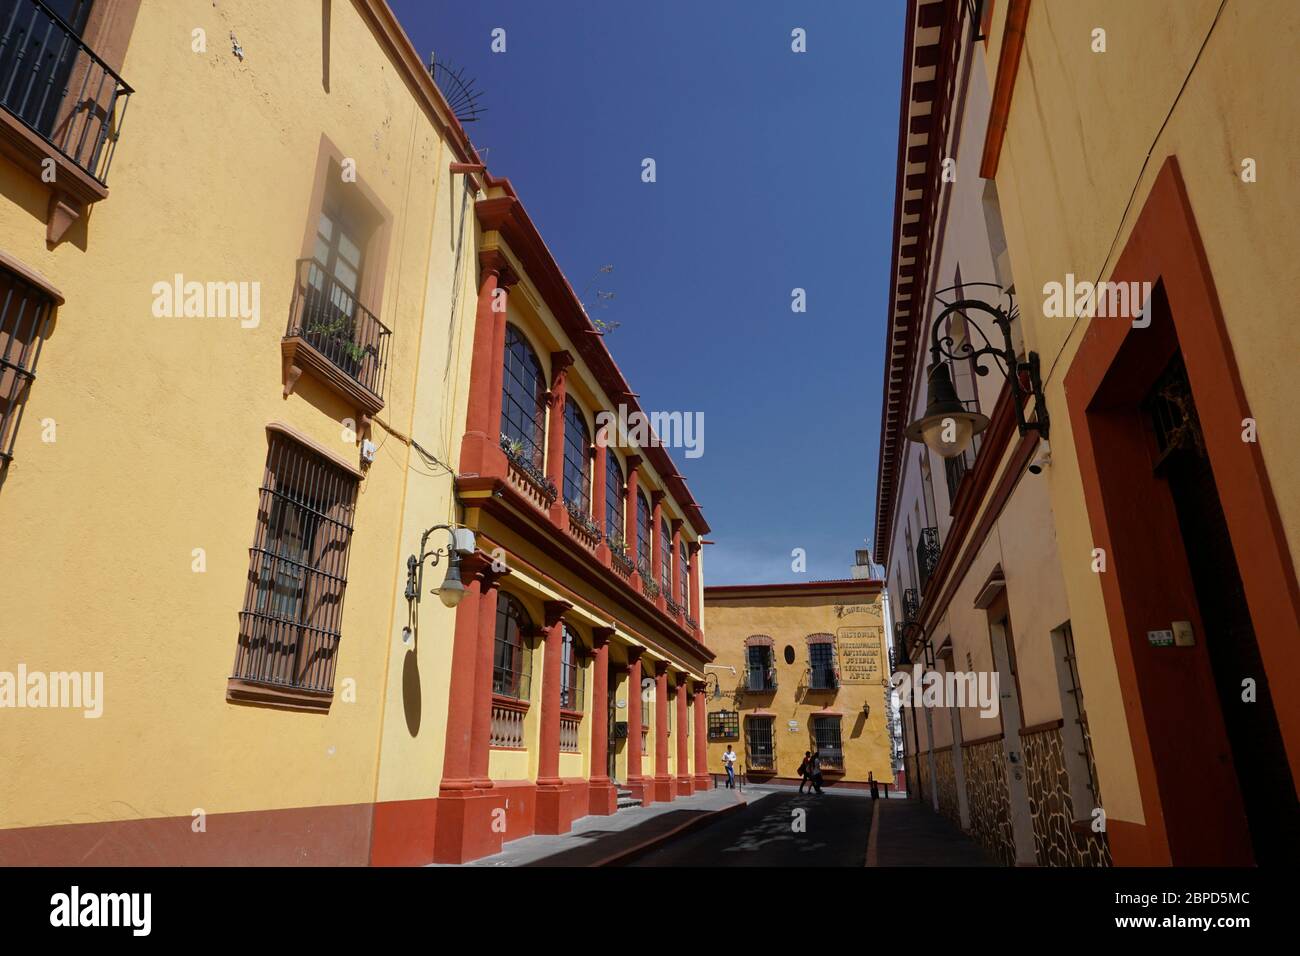 Empty small street with tourist and art shops, Cuernavaca, Mexico Stock Photo